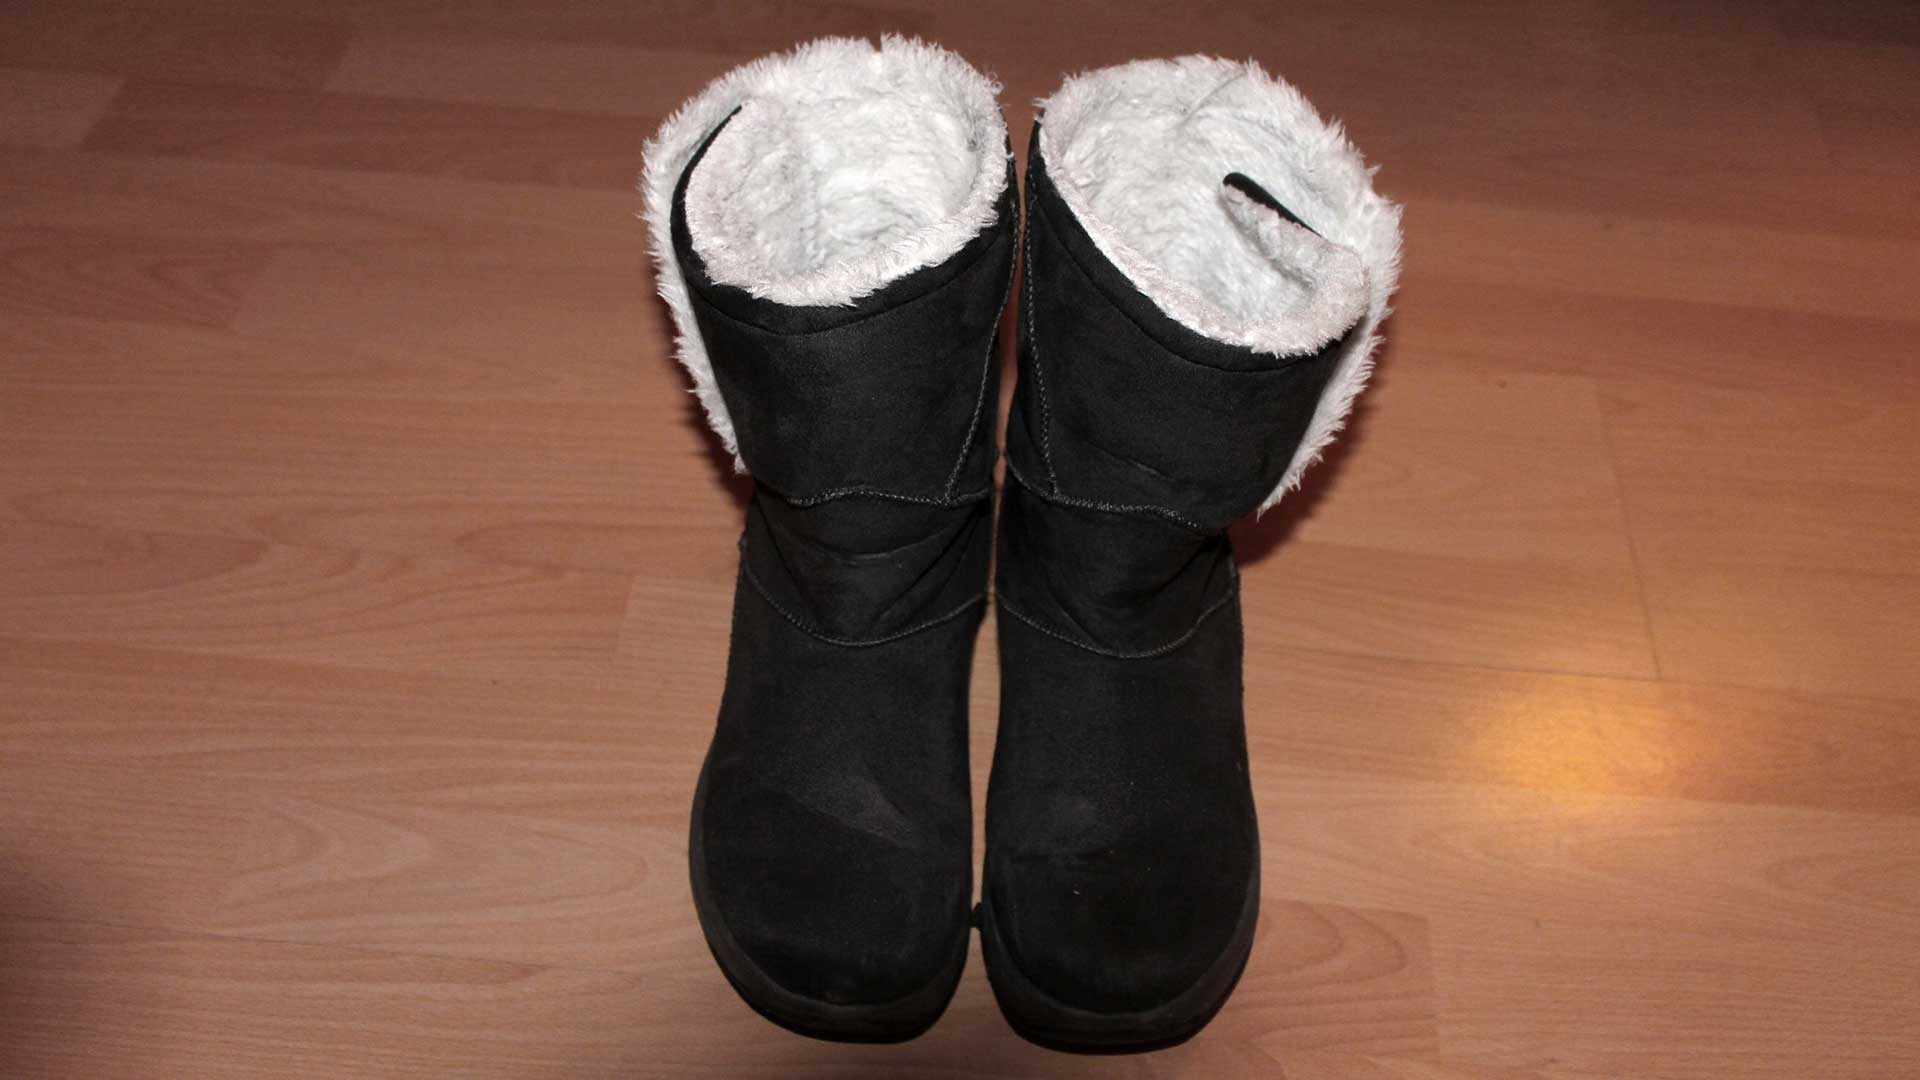 Is-It-Safe-to-Put-Away-Your-Snow-Boots--Better-Let-Them-Collect-Dust-Beside-Your-Front-Door-All-Year,-Just-in-Case.jpg